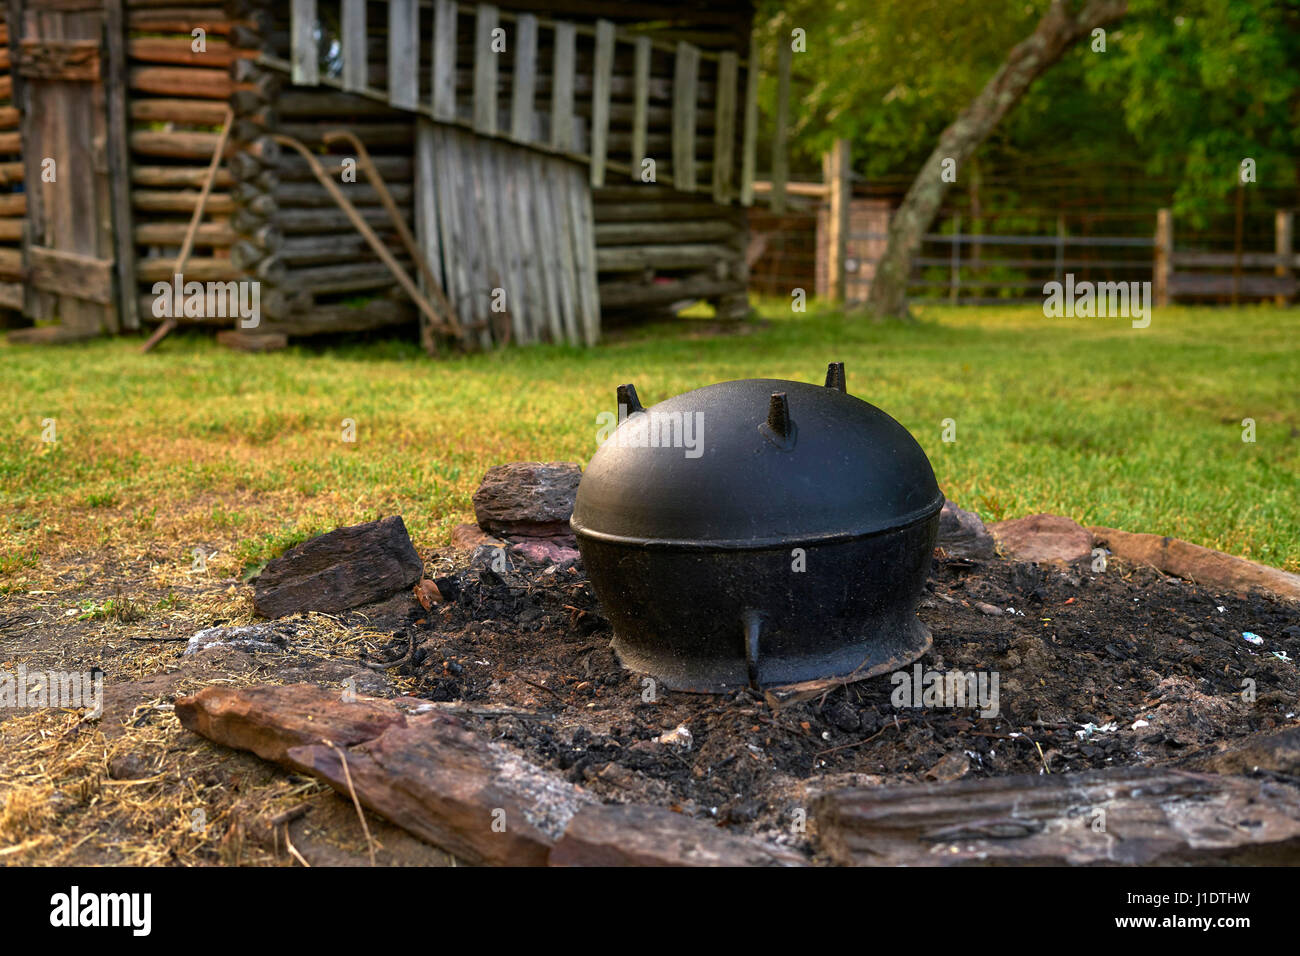 https://c8.alamy.com/comp/J1DTHW/cooking-over-an-open-fire-in-a-cast-iron-pot-used-to-be-the-standard-J1DTHW.jpg